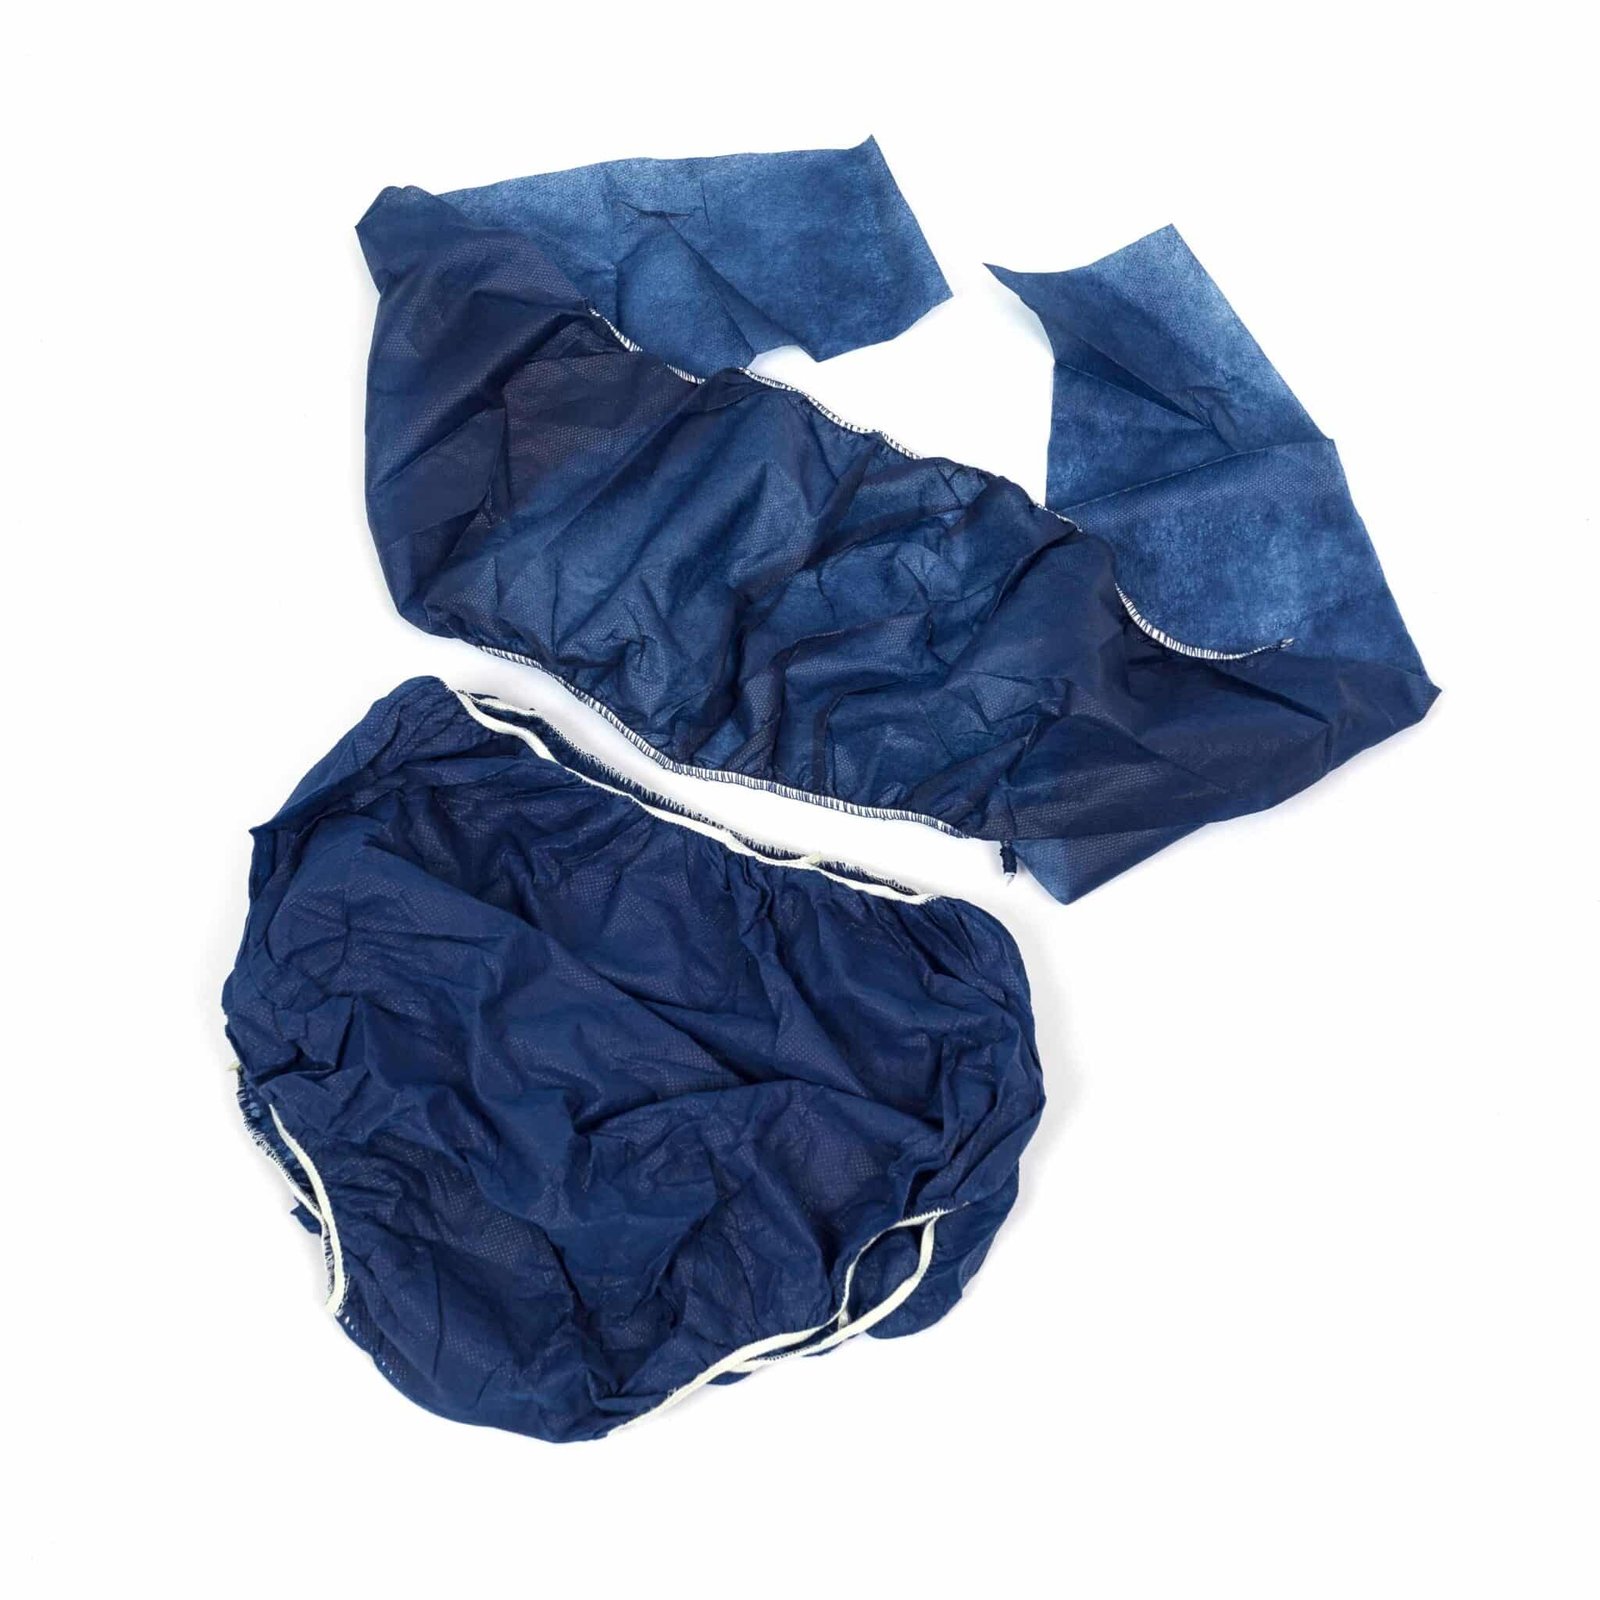 https://med-disposable.com/wp-content/uploads/2023/05/disposable-underwear-12-scaled.jpg